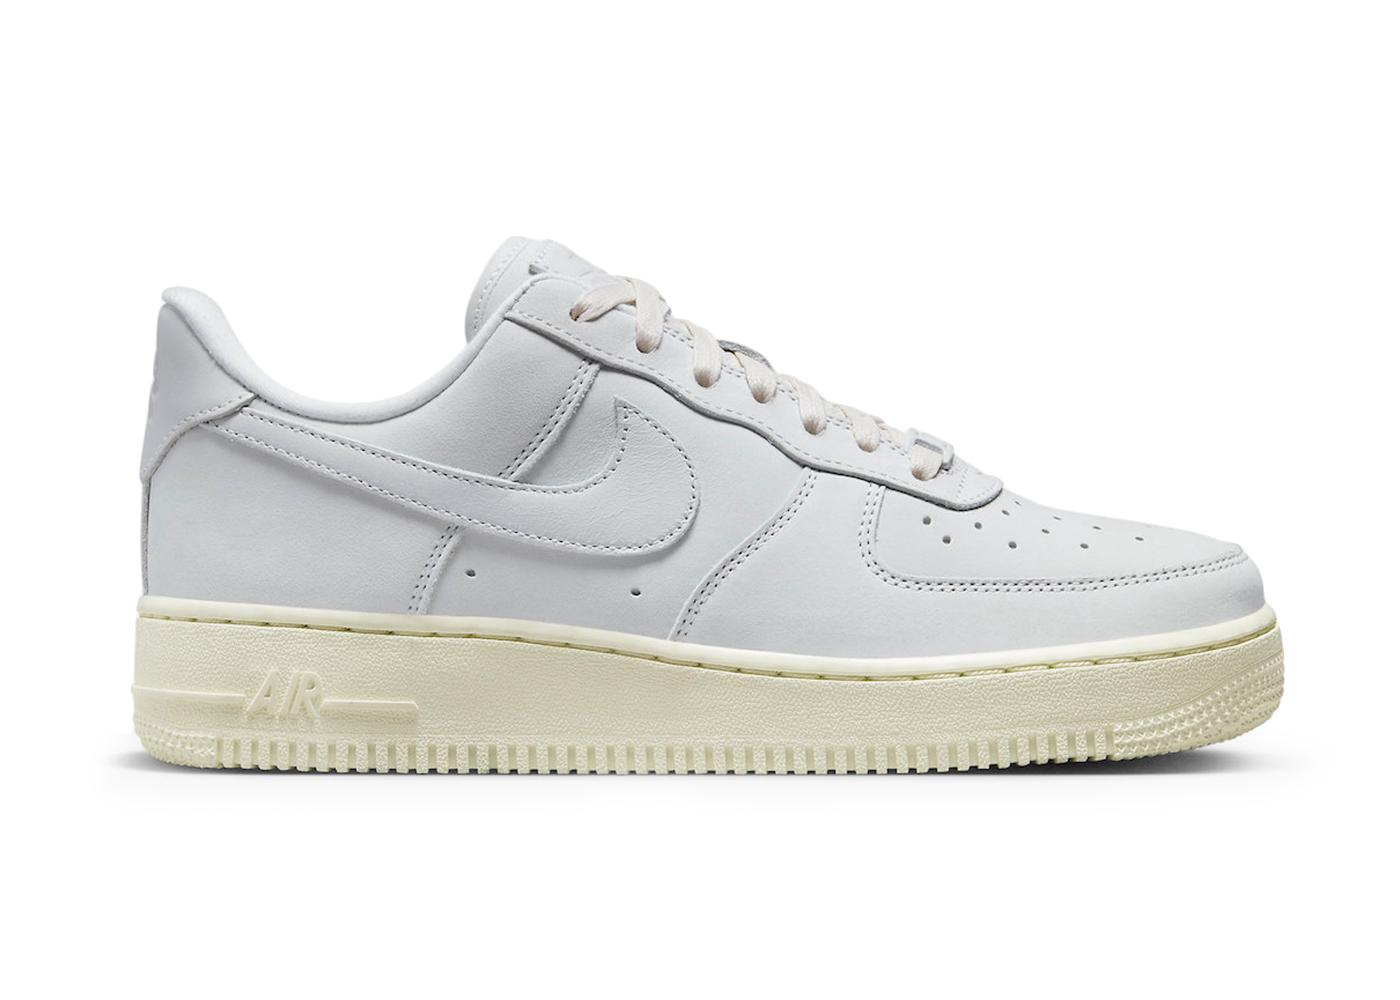 Nike Air Force 1 Low Summit White (Women's) - DR9503-100 - GB